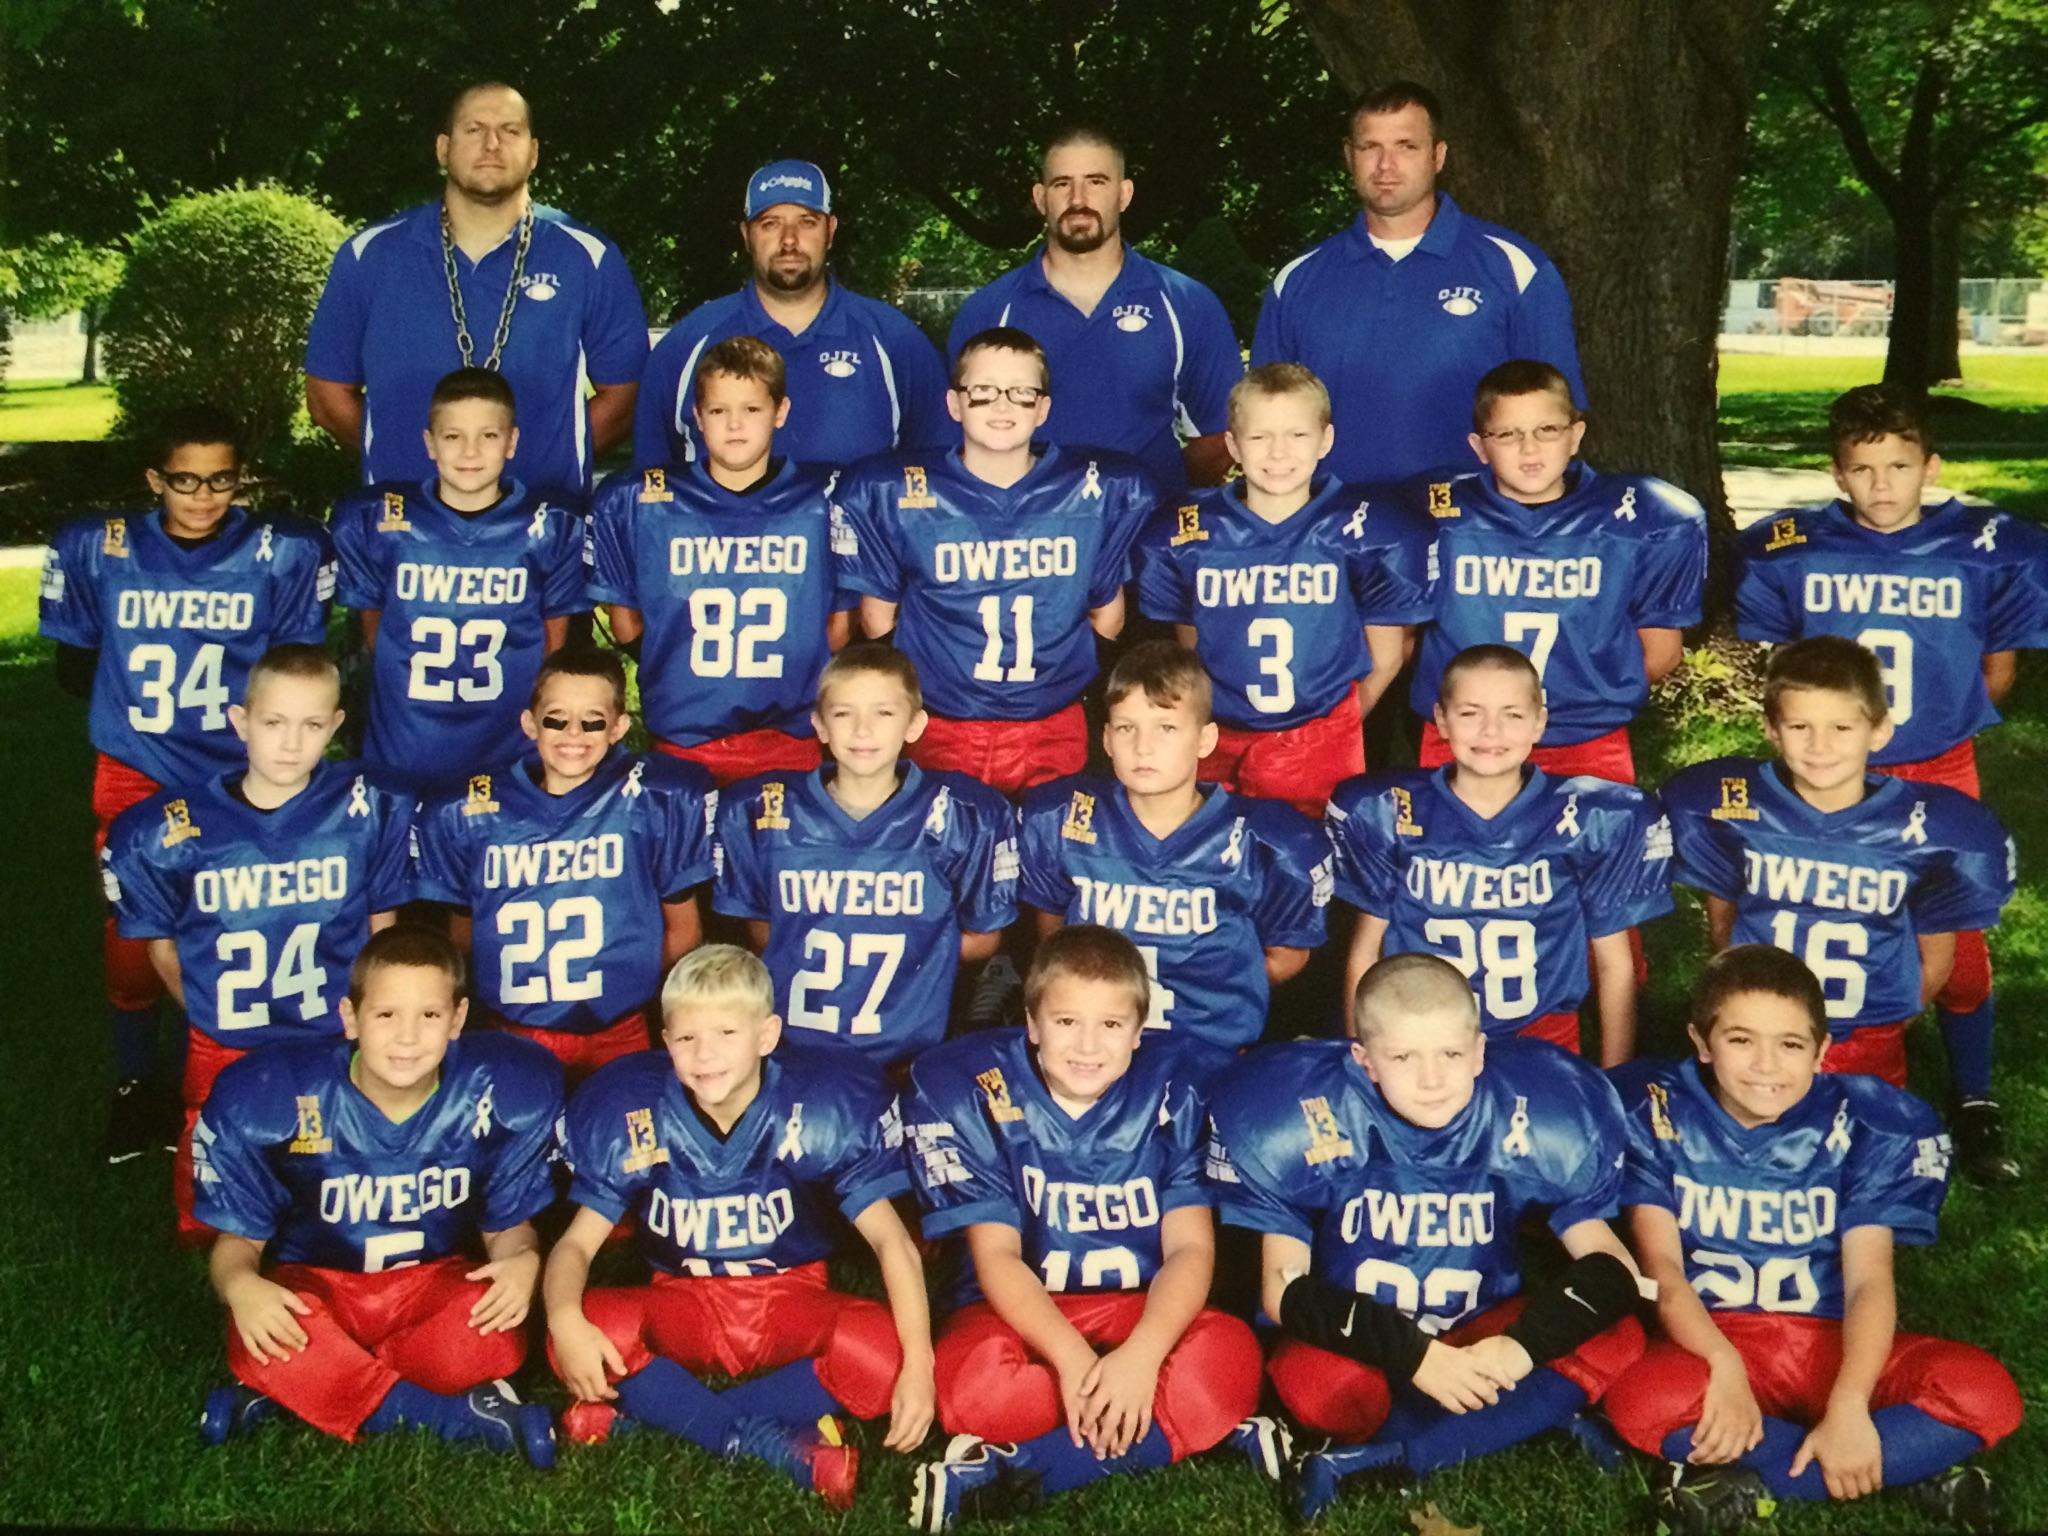 Owego Junior Football League makes it to the Pee Wee Super Bowl